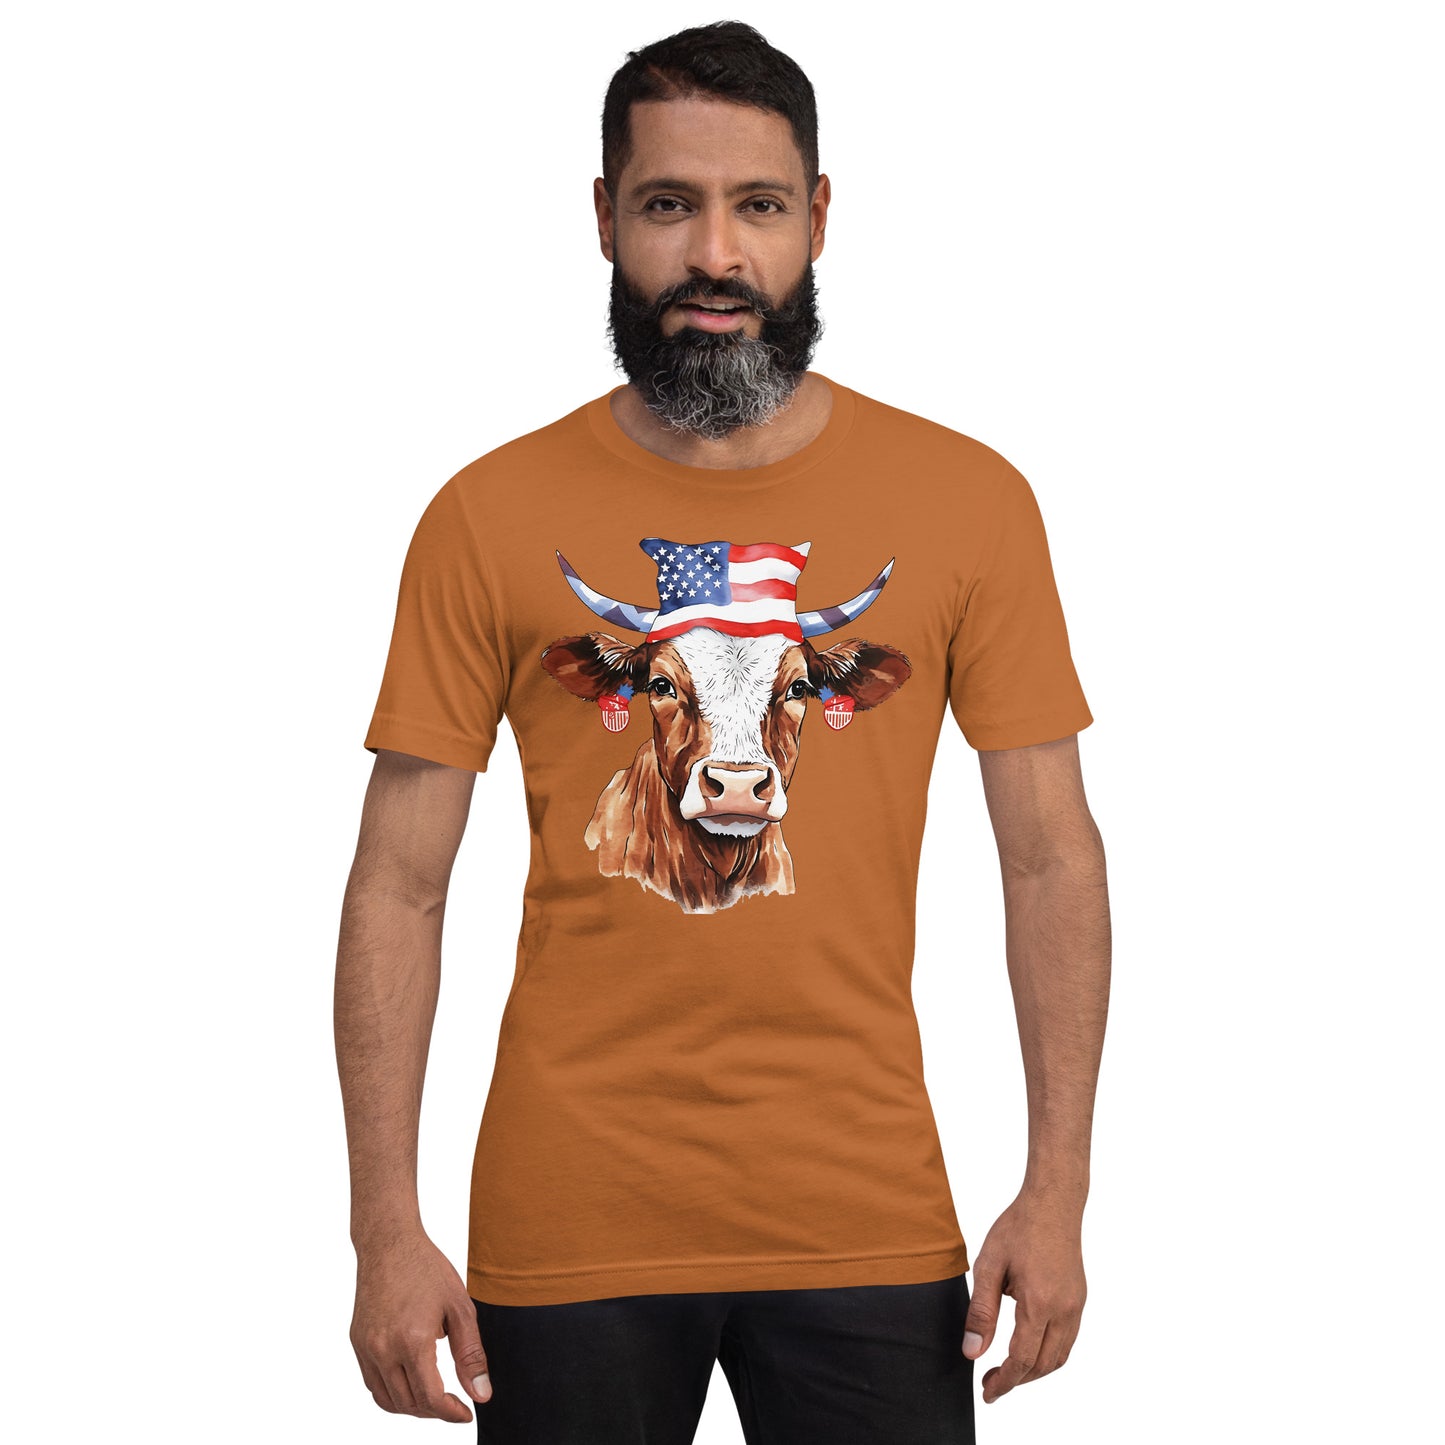 USA Patriotic Cow Tshirt For Cow Lovers